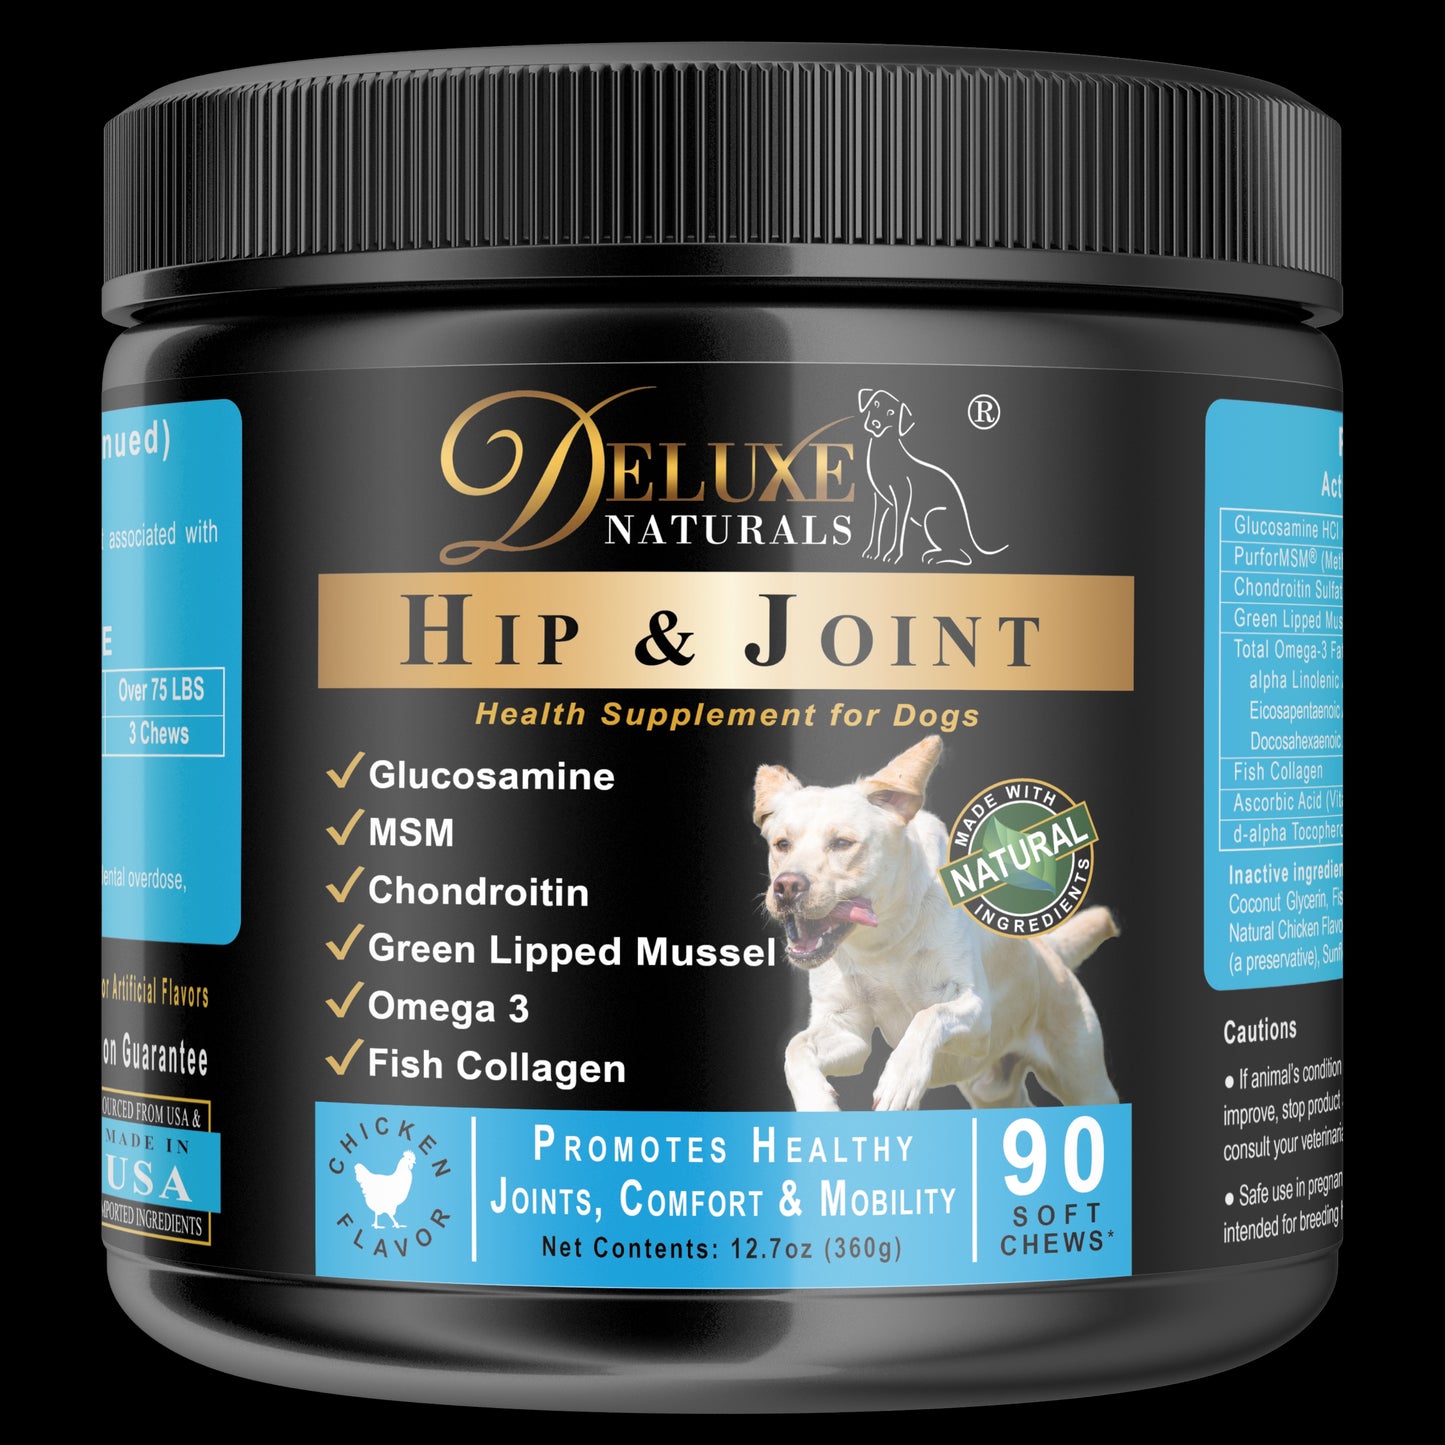 Deluxe Naturals Hip and Joint Soft Chews for Dogs - 360 Count (Pack of 4 x 90ct)